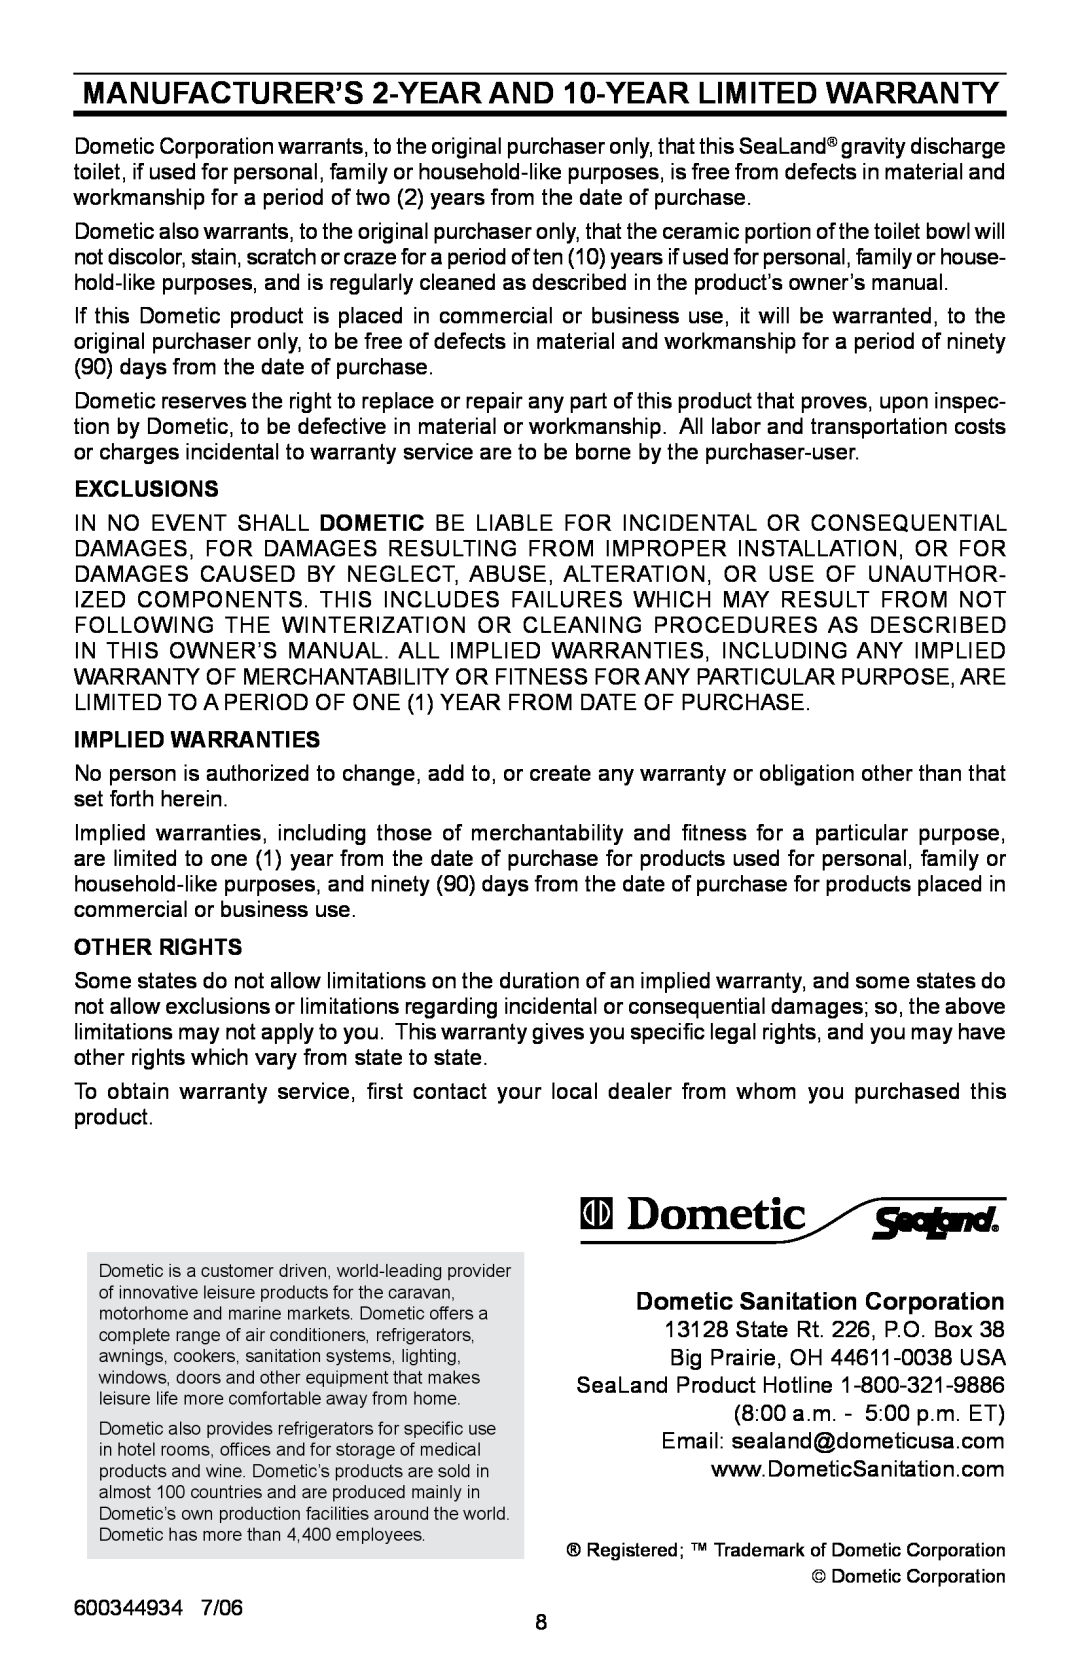 Dometic 110, 210 owner manual Manufacturer’s 2-Year and 10-year Limited Warranty, Dometic Sanitation Corporation 